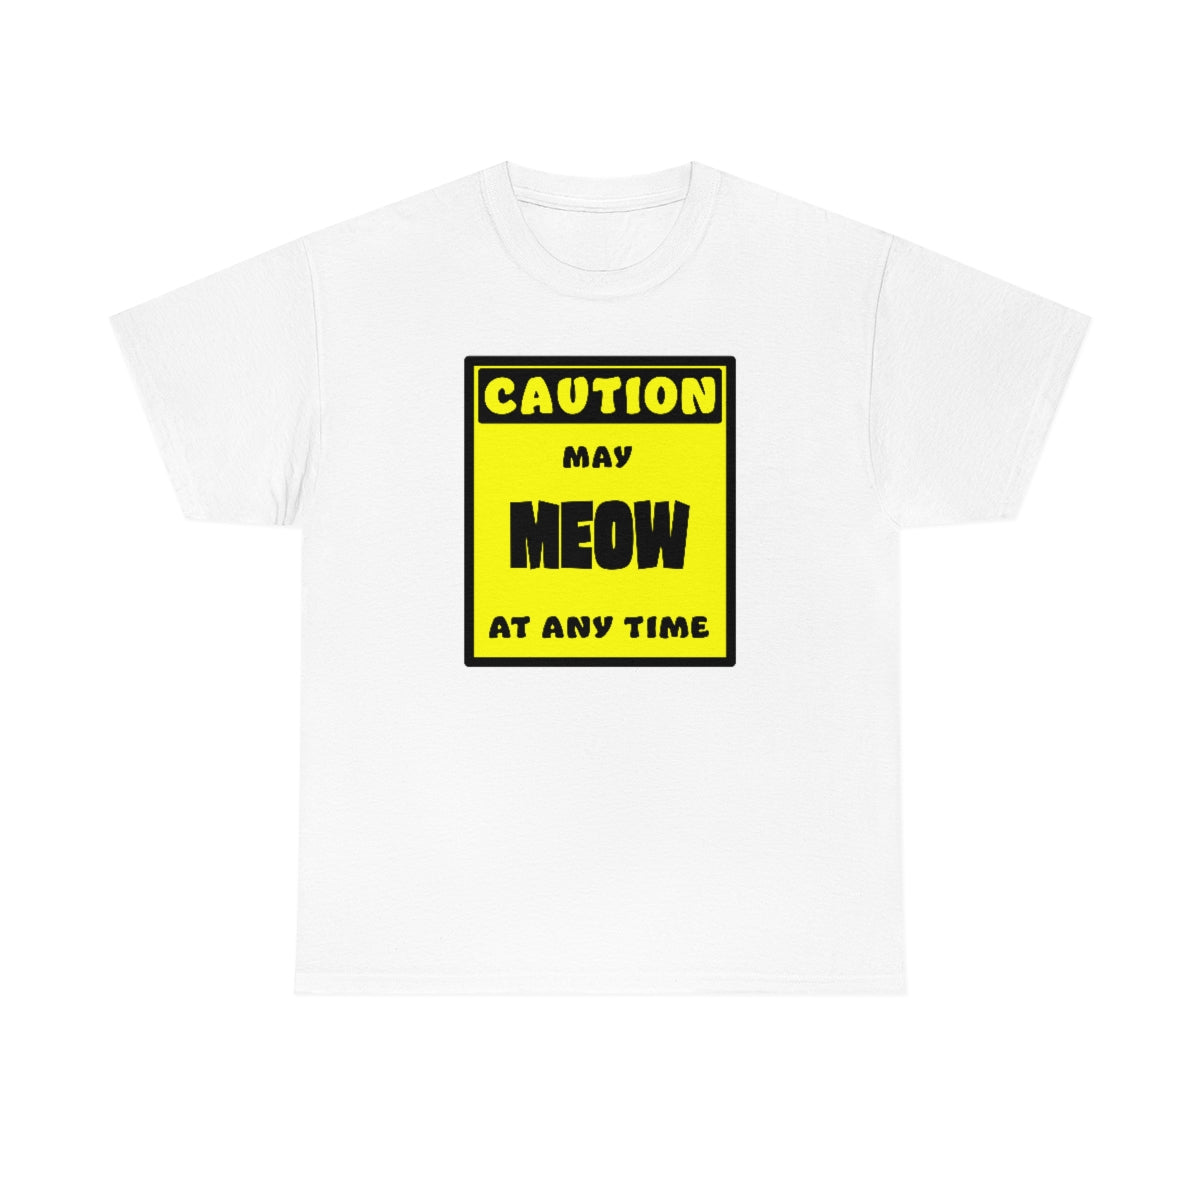 CAUTION! May MEOW at any time! - T-Shirt T-Shirt AFLT-Whootorca White S 